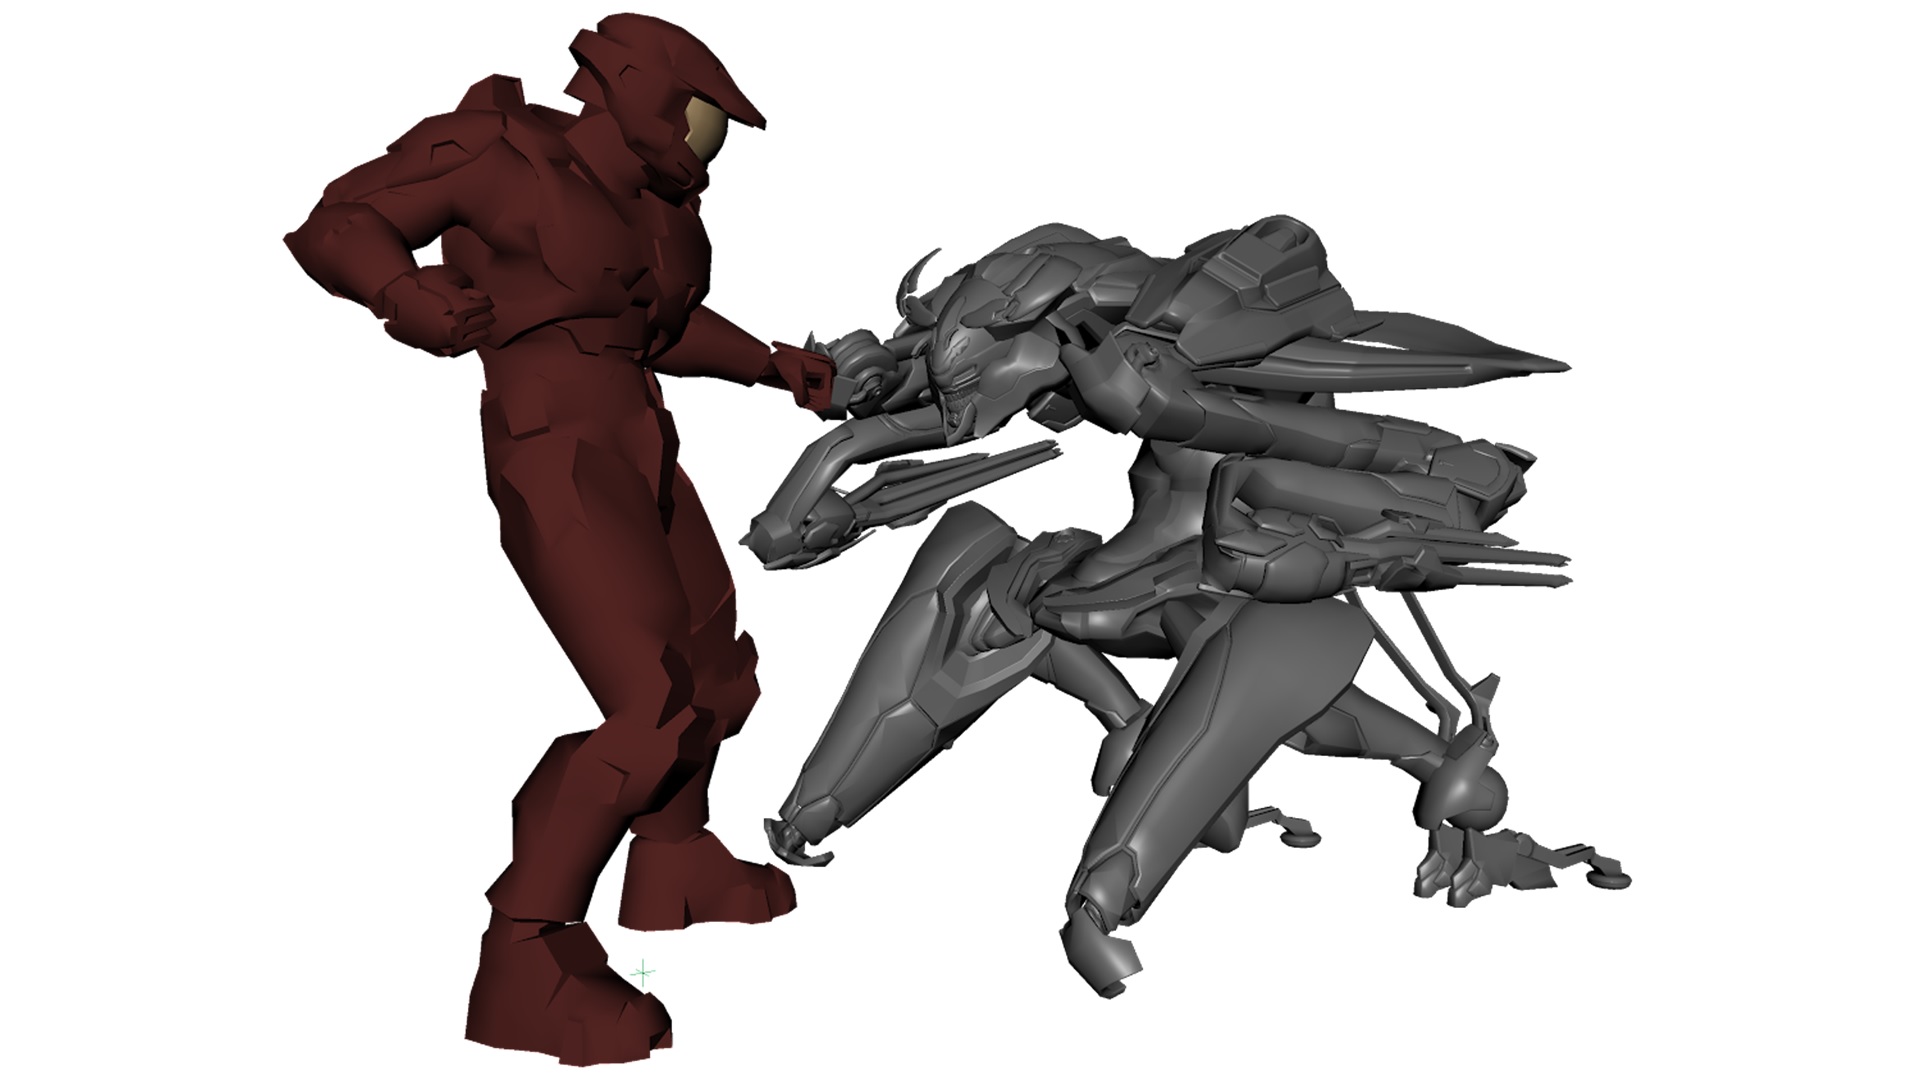 Digsite screenshot of the Master Chief and an earlier iteration of the Promethean Knight in a brawl